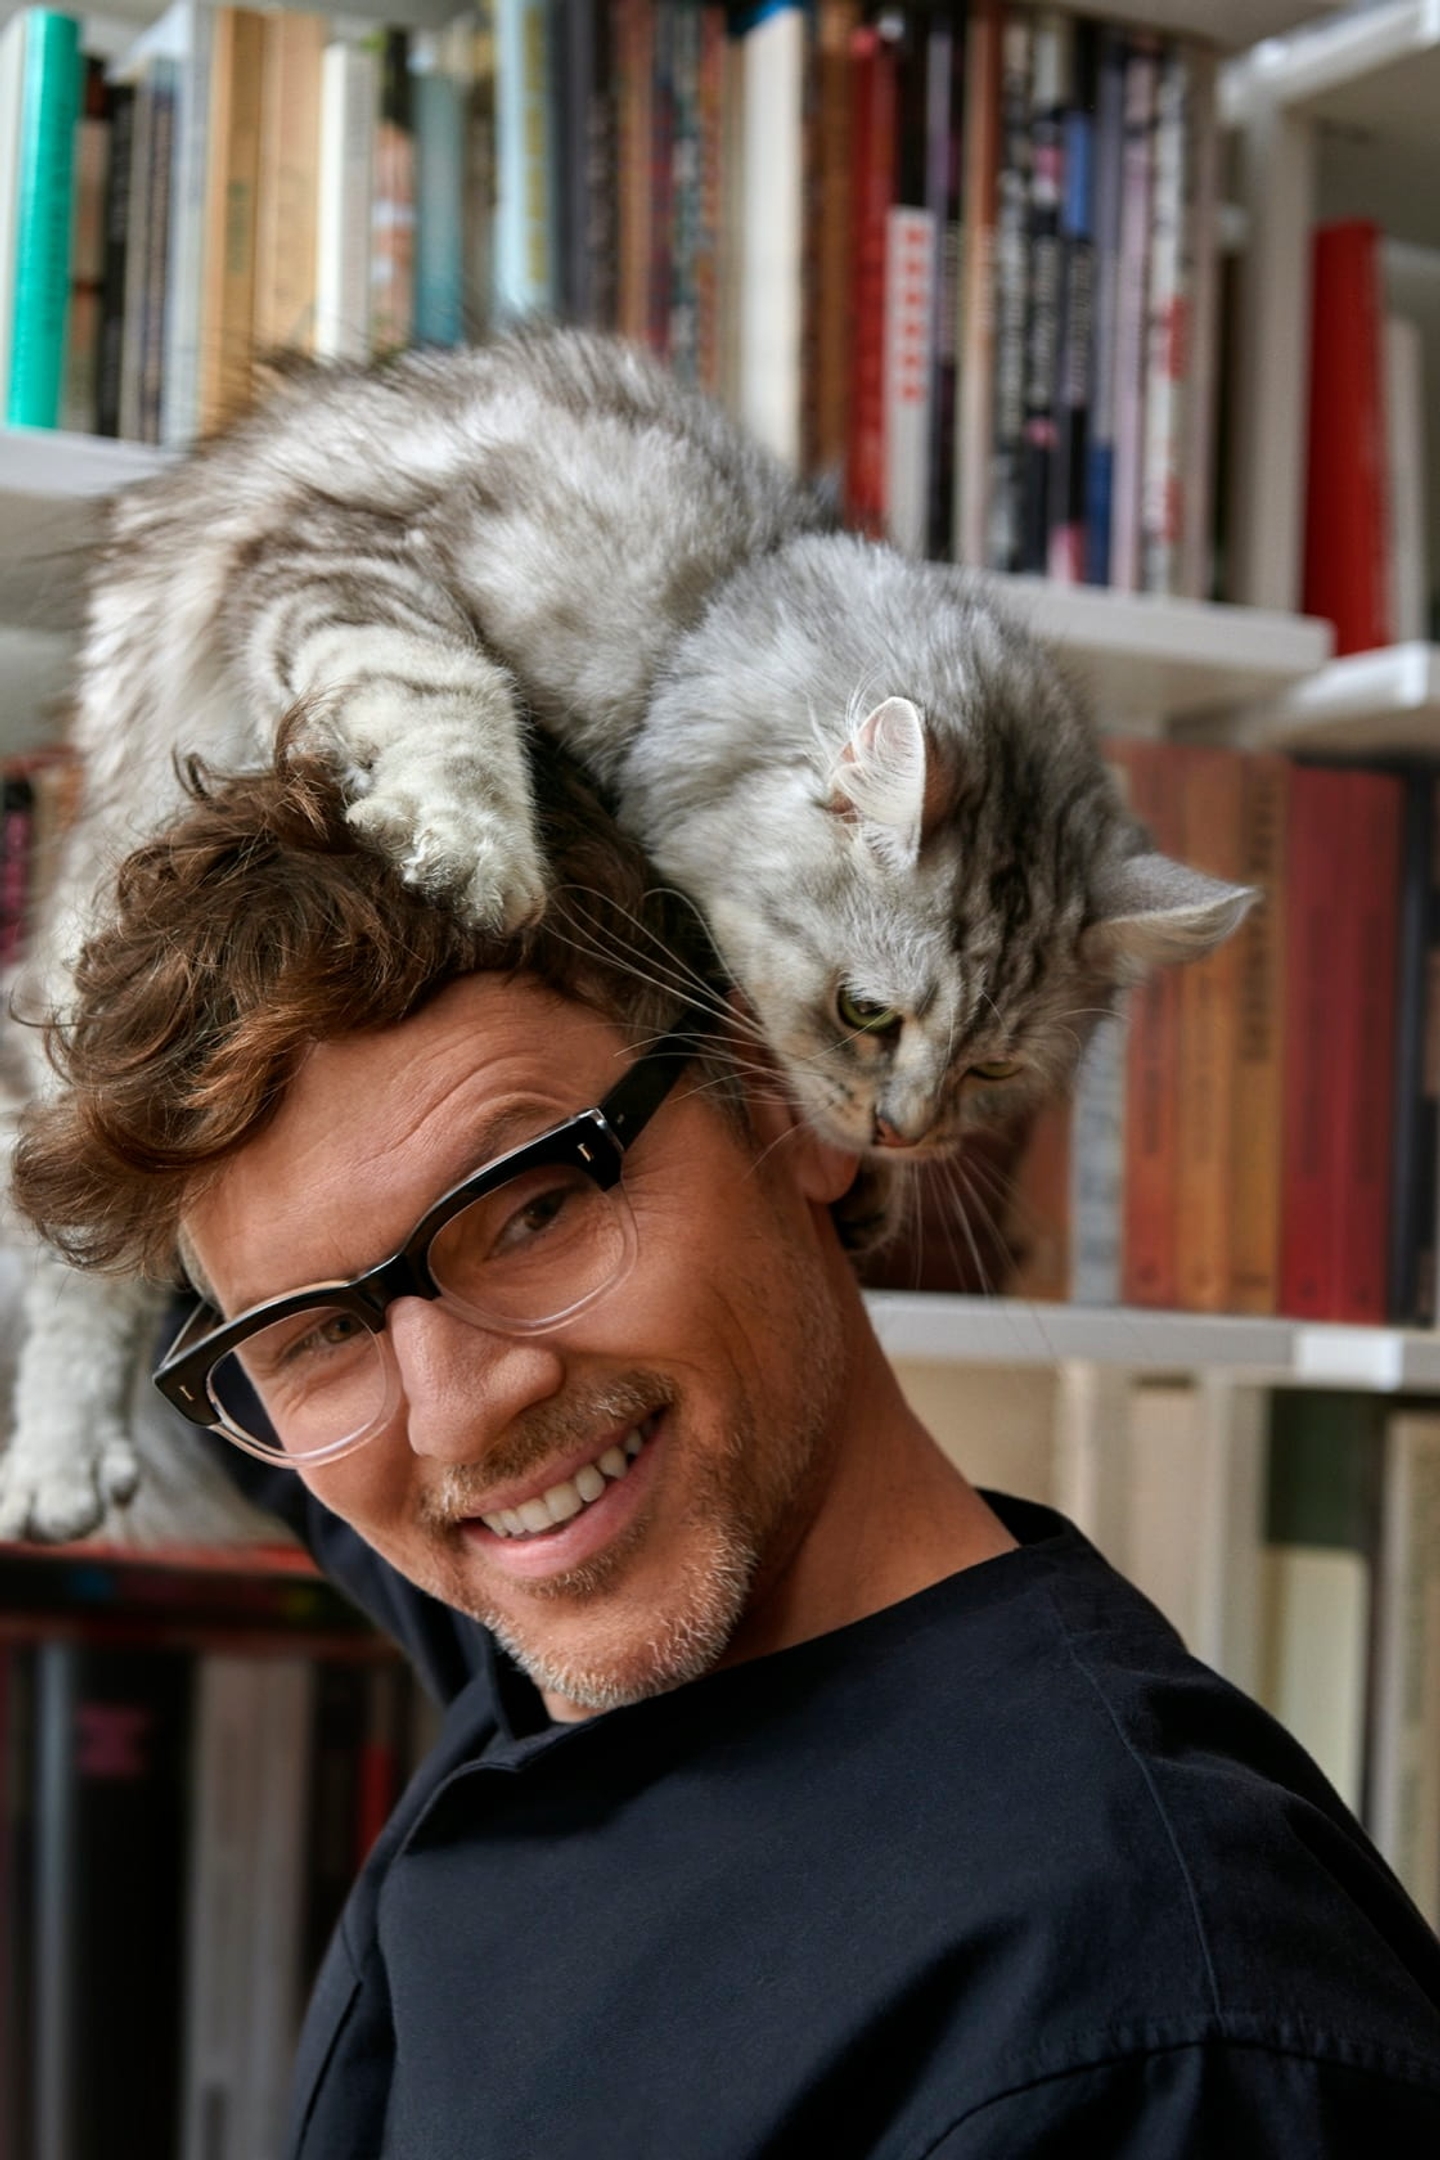 A fluffy cat tries to perch on top of a man's head. The man looks amused